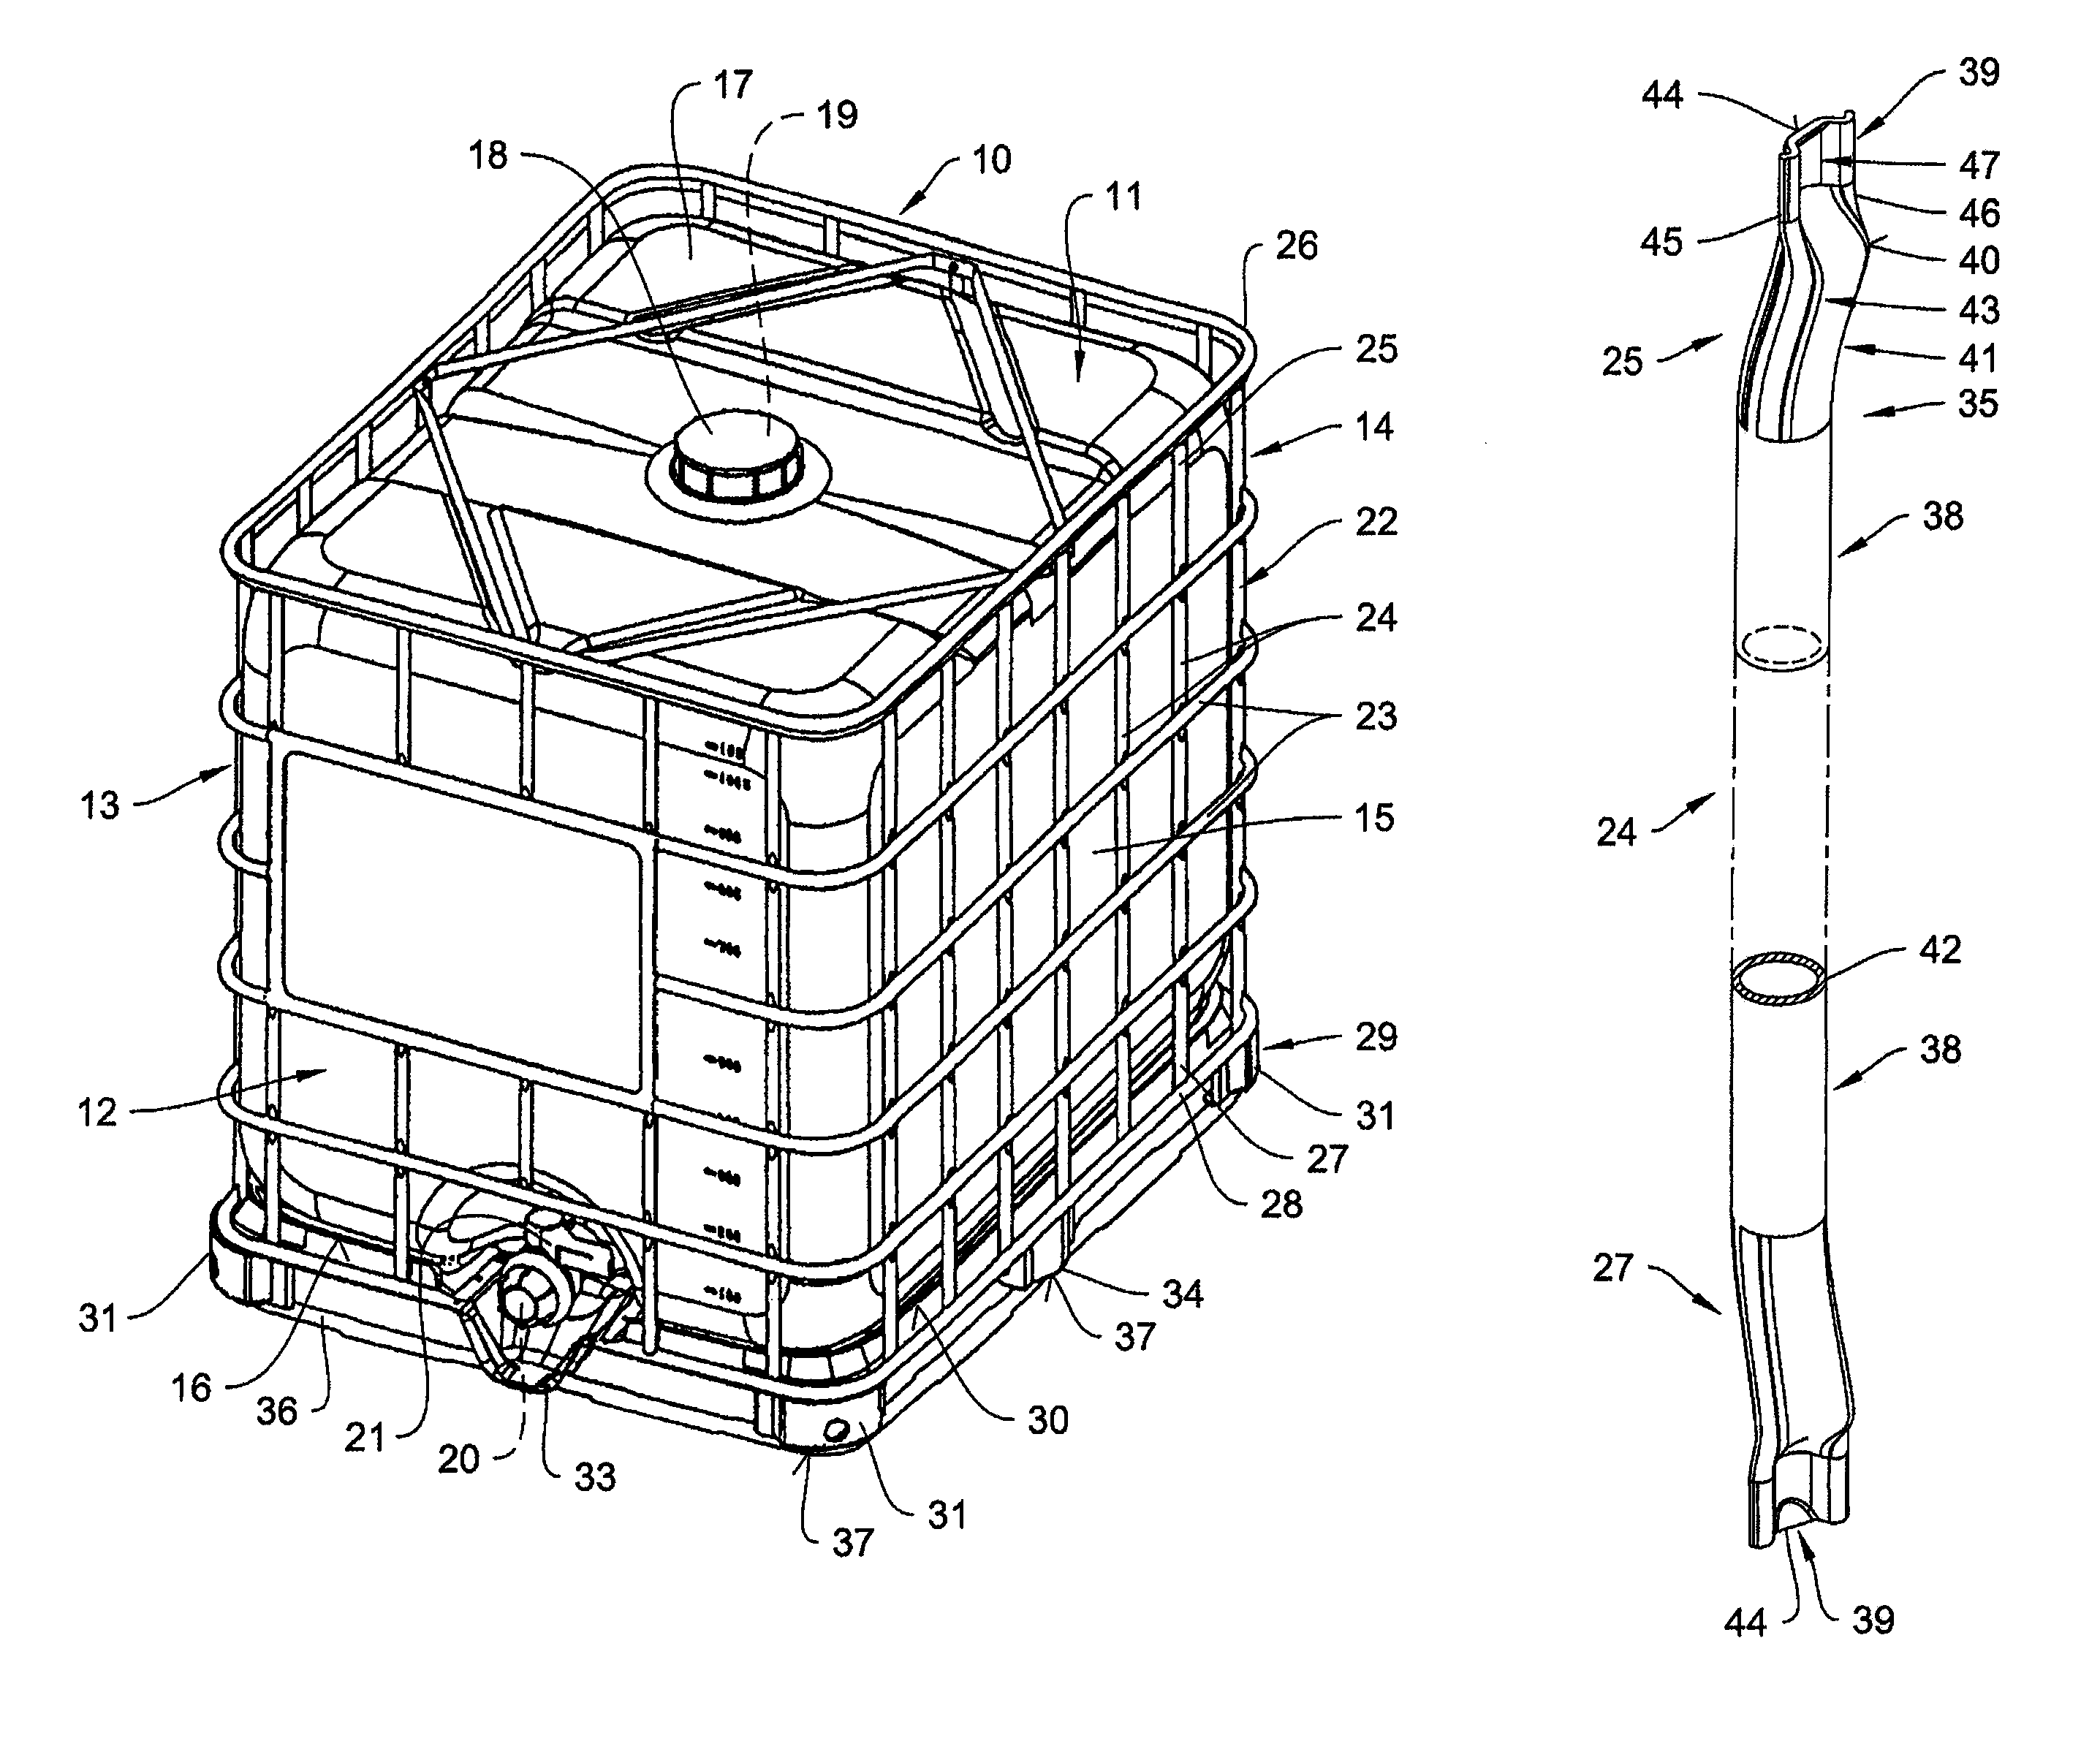 Transporting and storing container for liquids